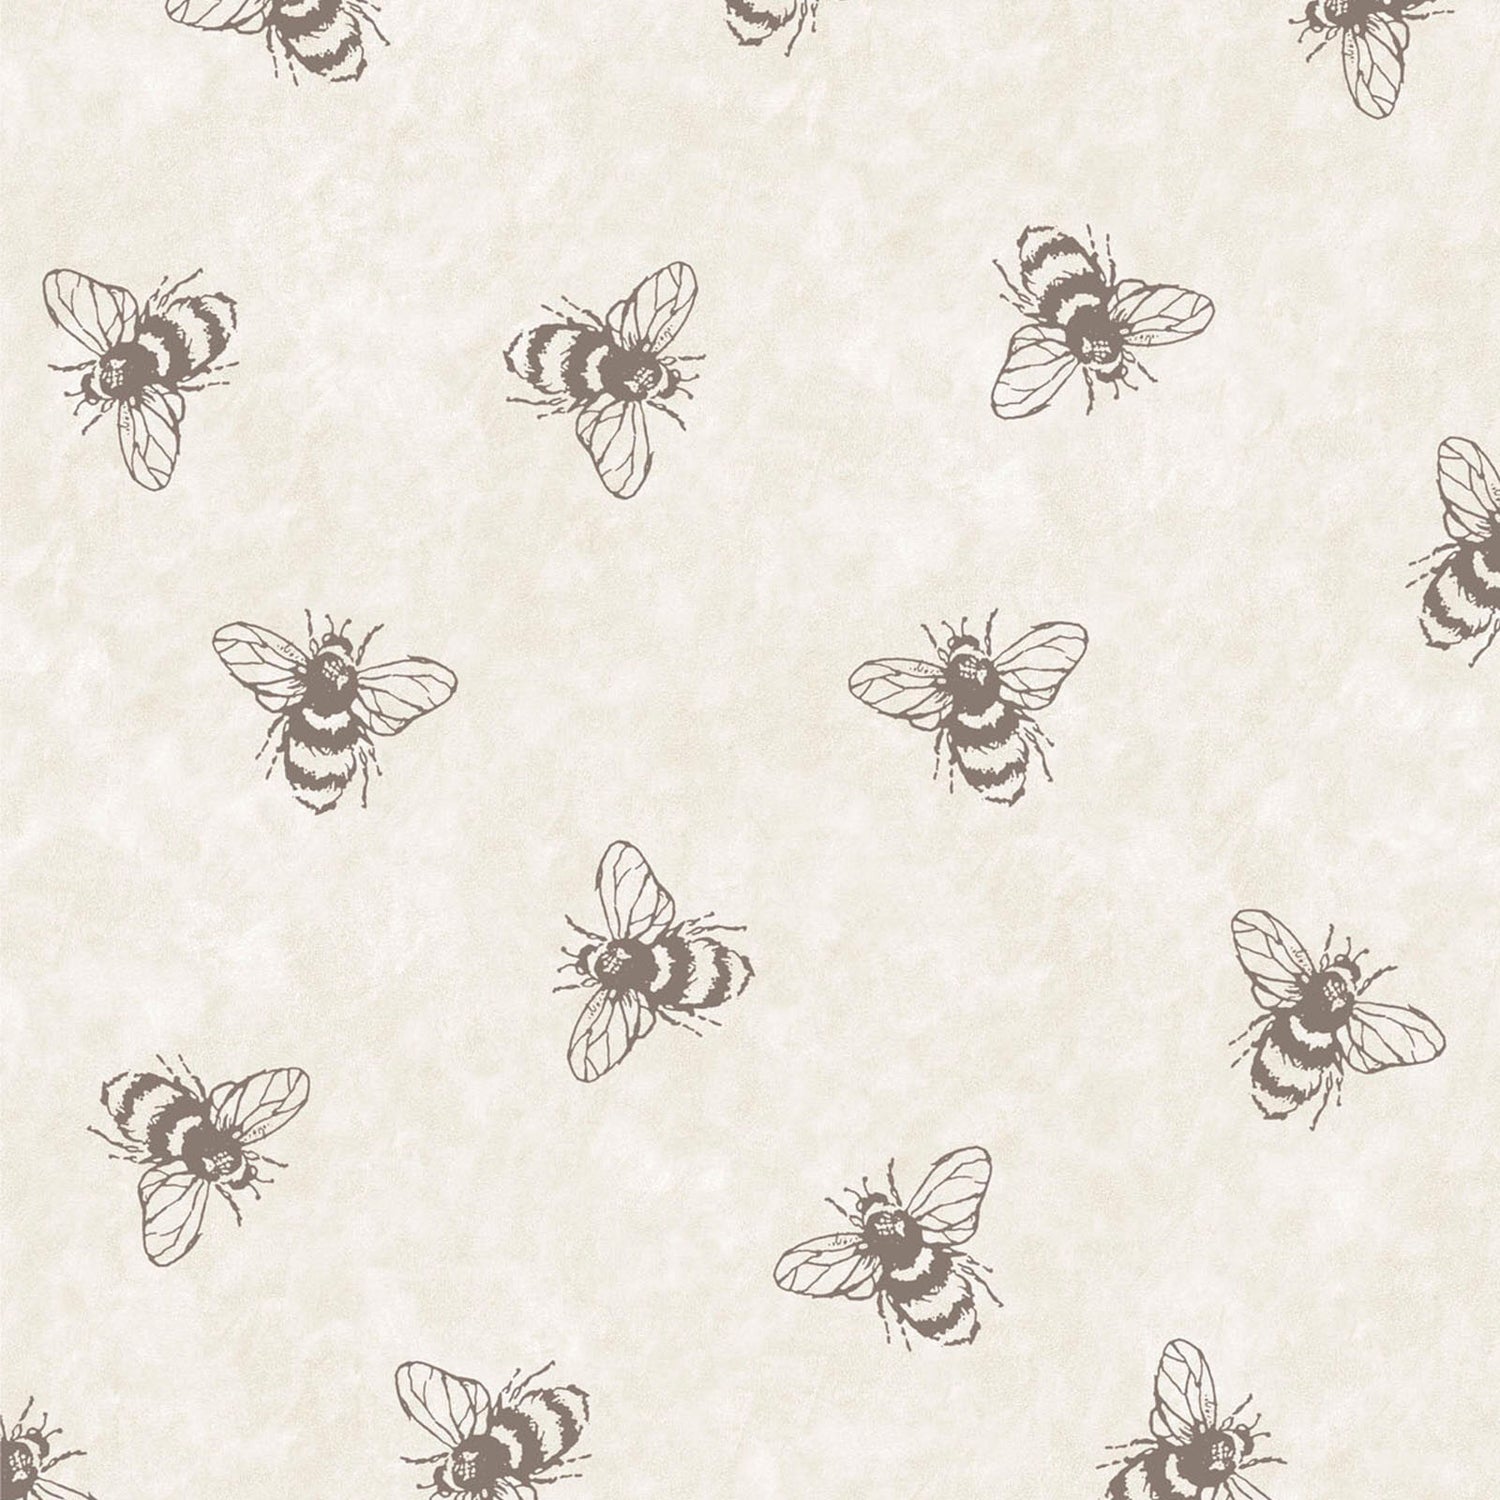 Bumble Bees Fabric Wallpaper and Home Decor  Spoonflower